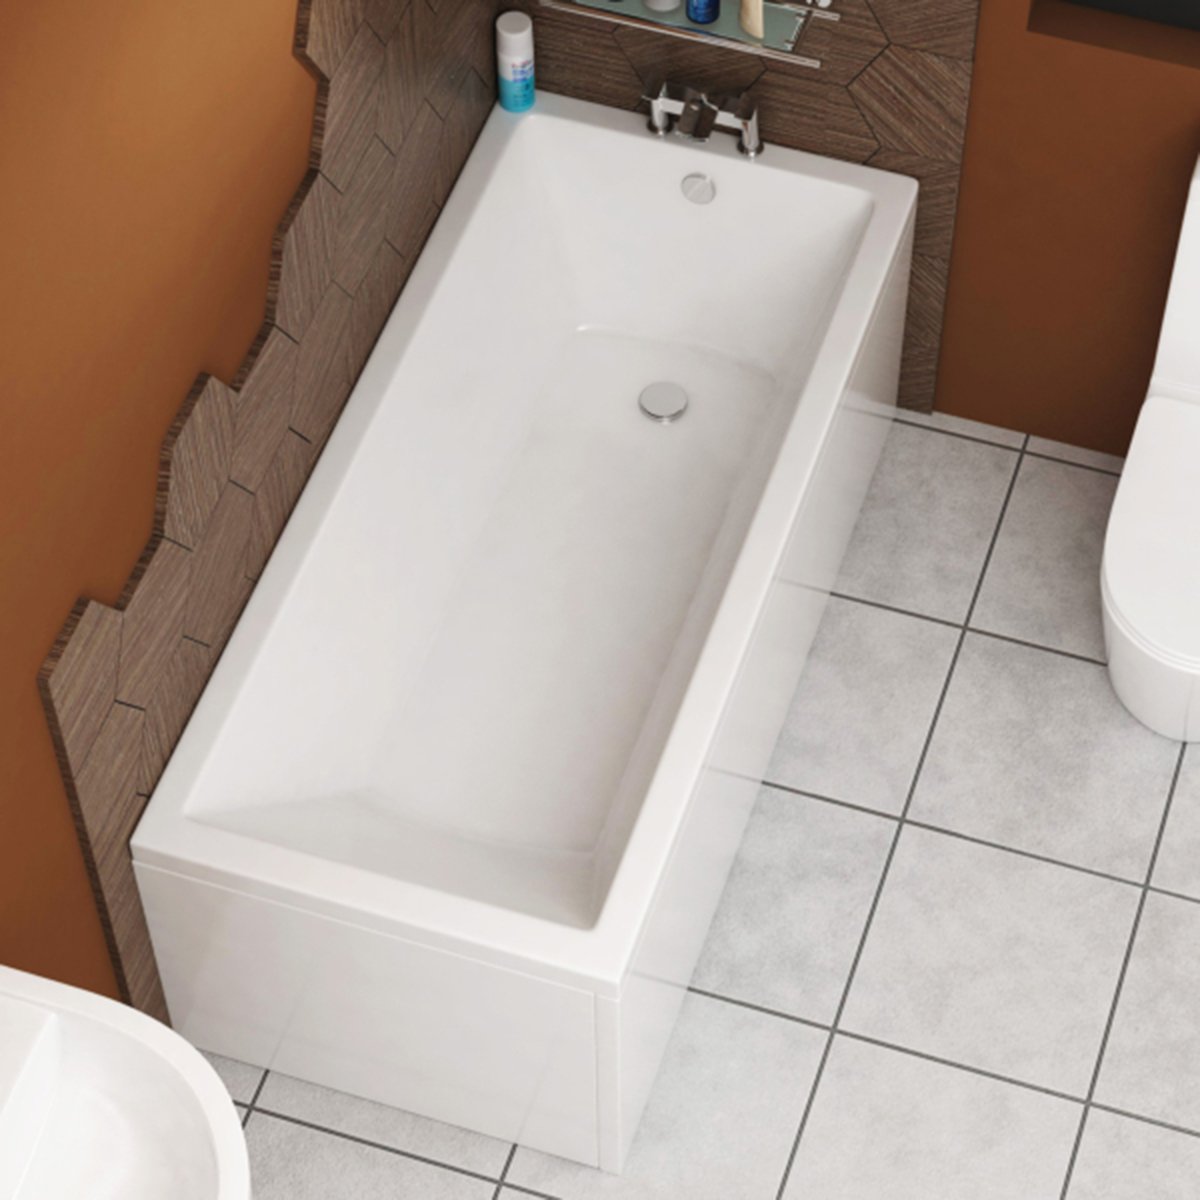 What Is A Standard Bath Size, What Are The Dimensions Of A Standard Bathtub